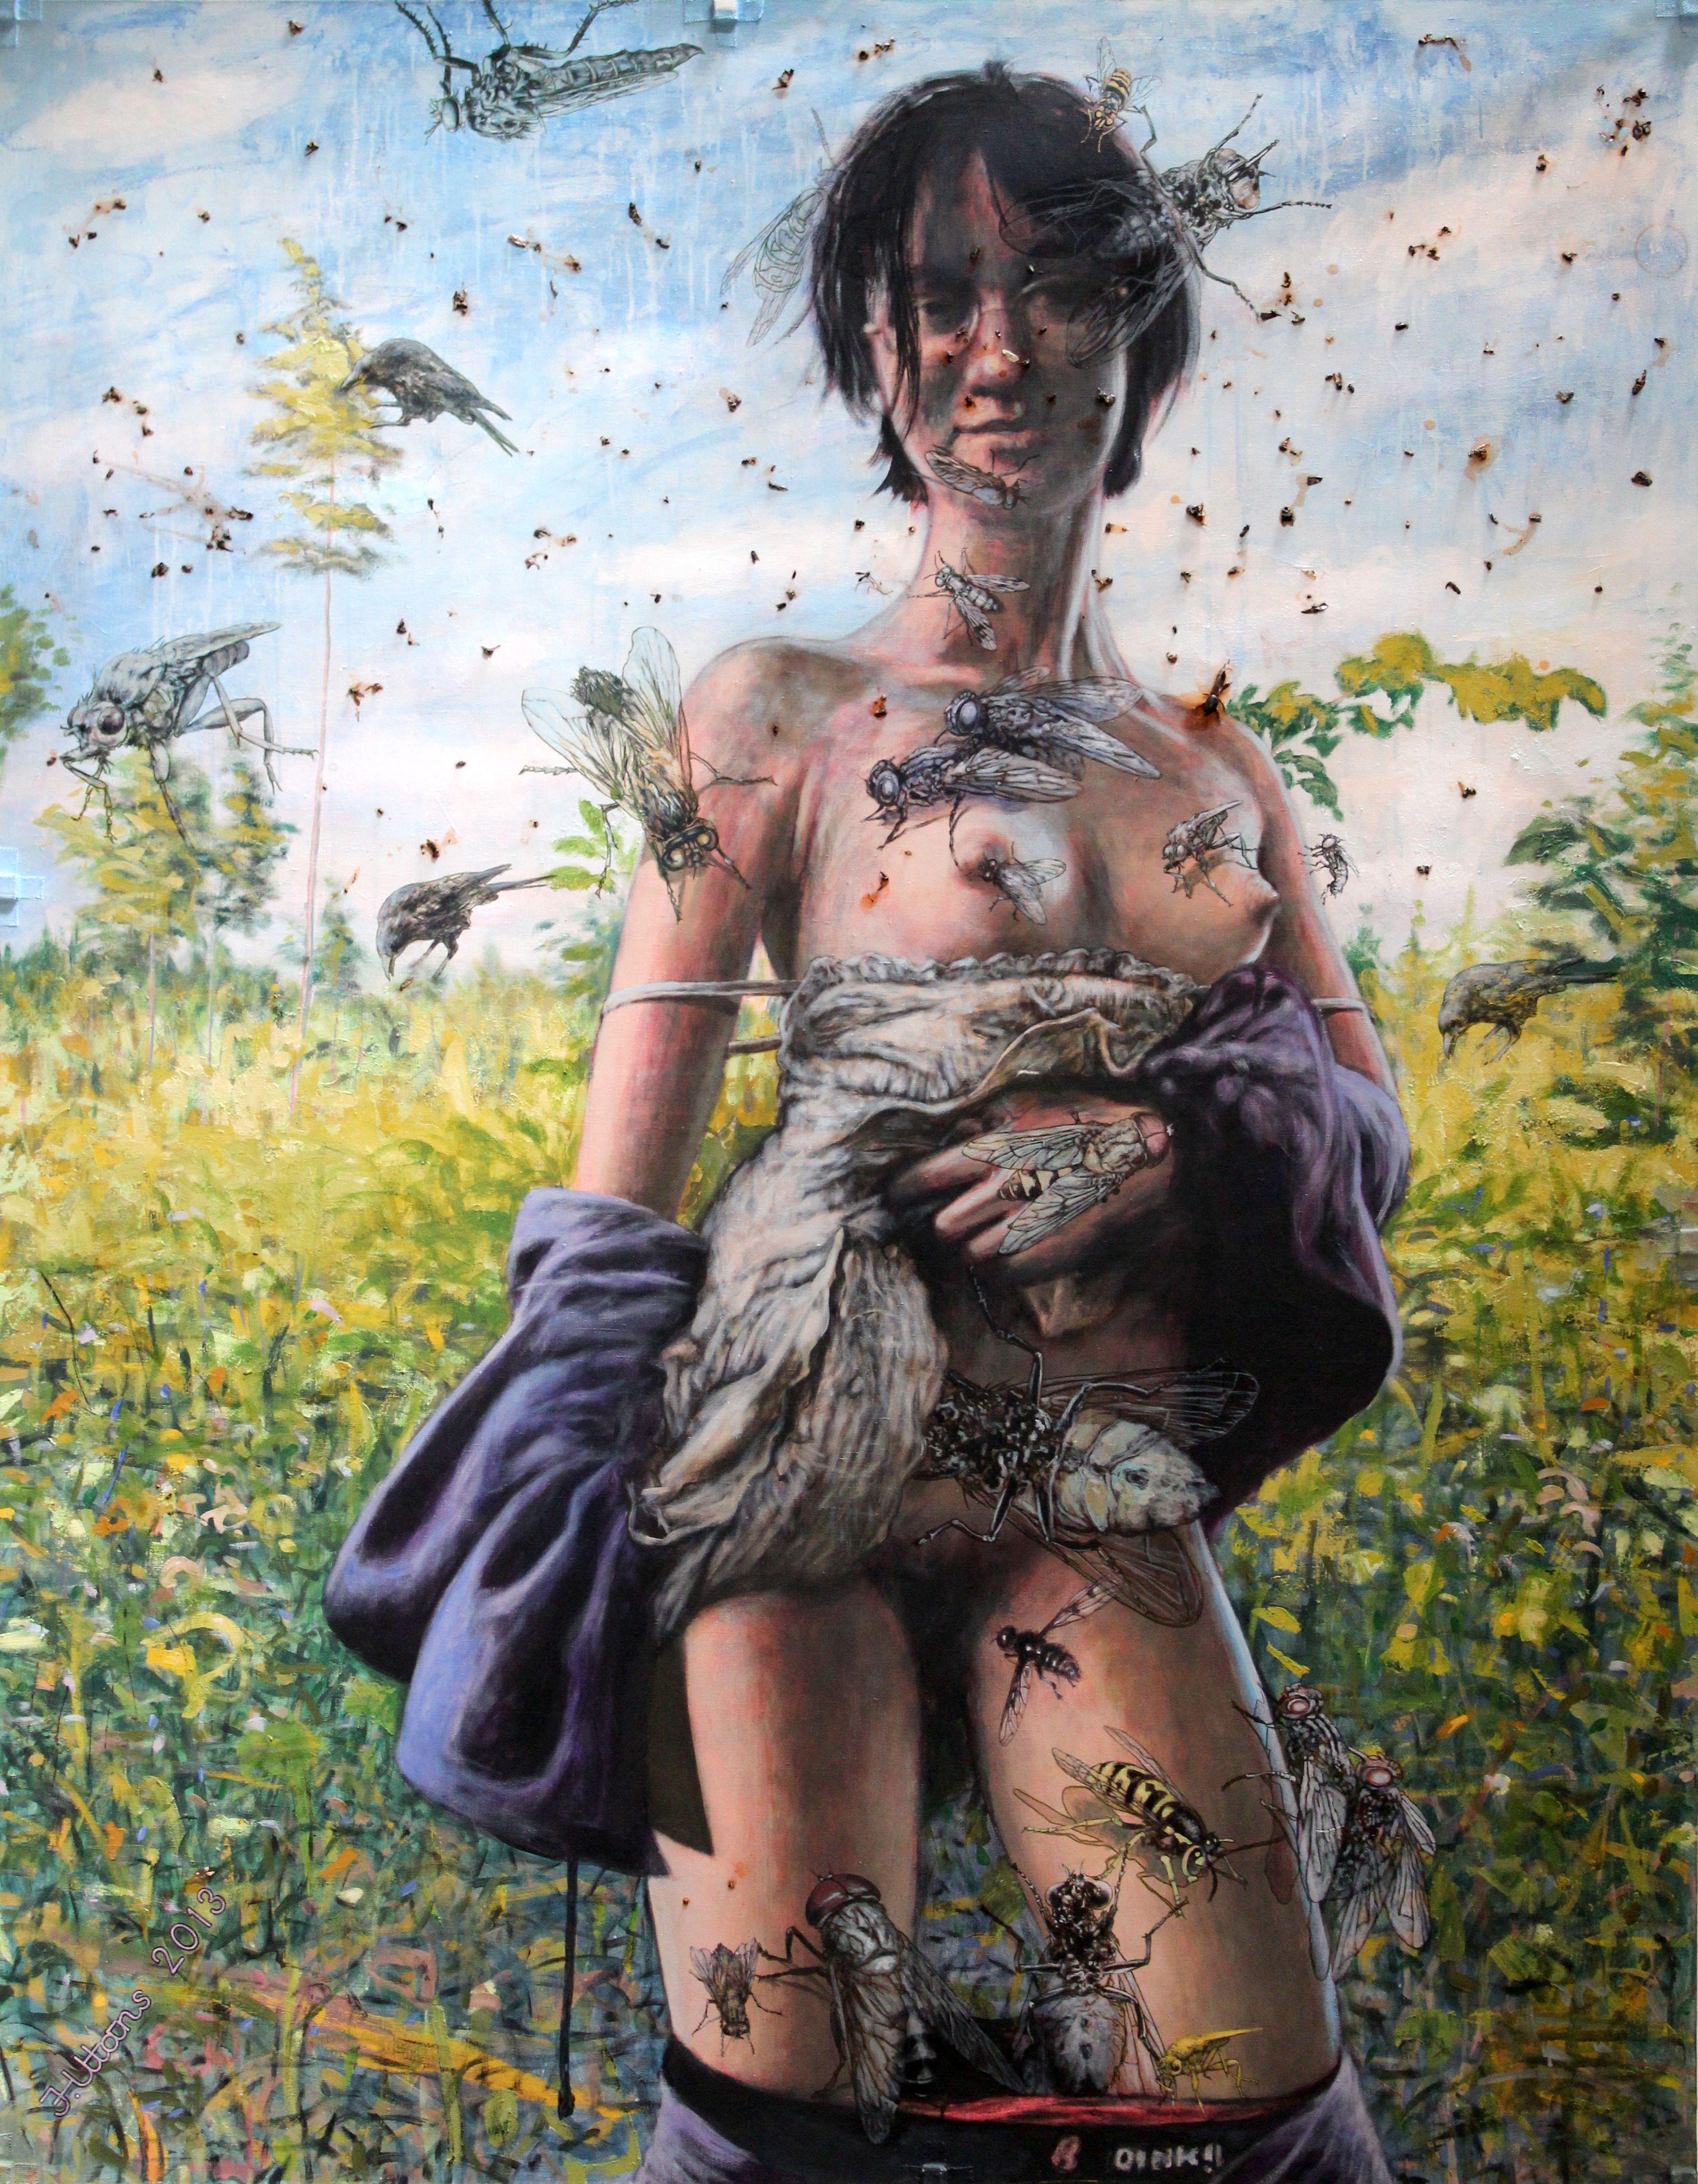 Juris Utans Nude Painting - Young berry collector. Erotica. 2013. Canvas, mixed media, 205X160 cm